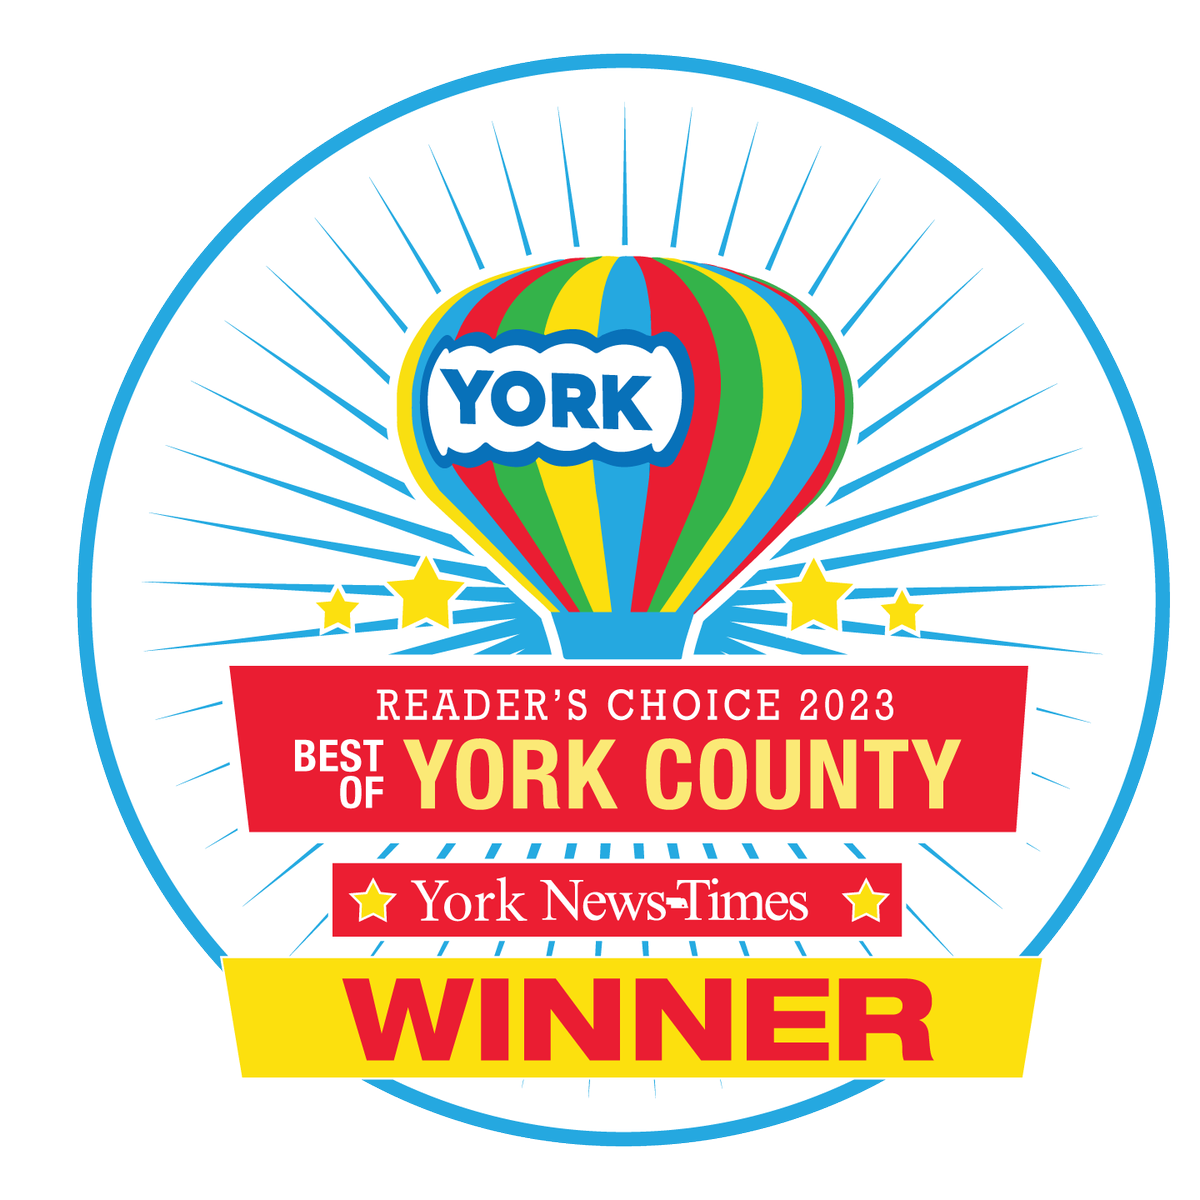 We're honored to be counted among the Best of York County! We're excited to be celebrating wins in these three categories: 🤝 Best Customer Service 🏦 Best Bank 💼 Best Small Place to Work Thank you for your continued trust and support!